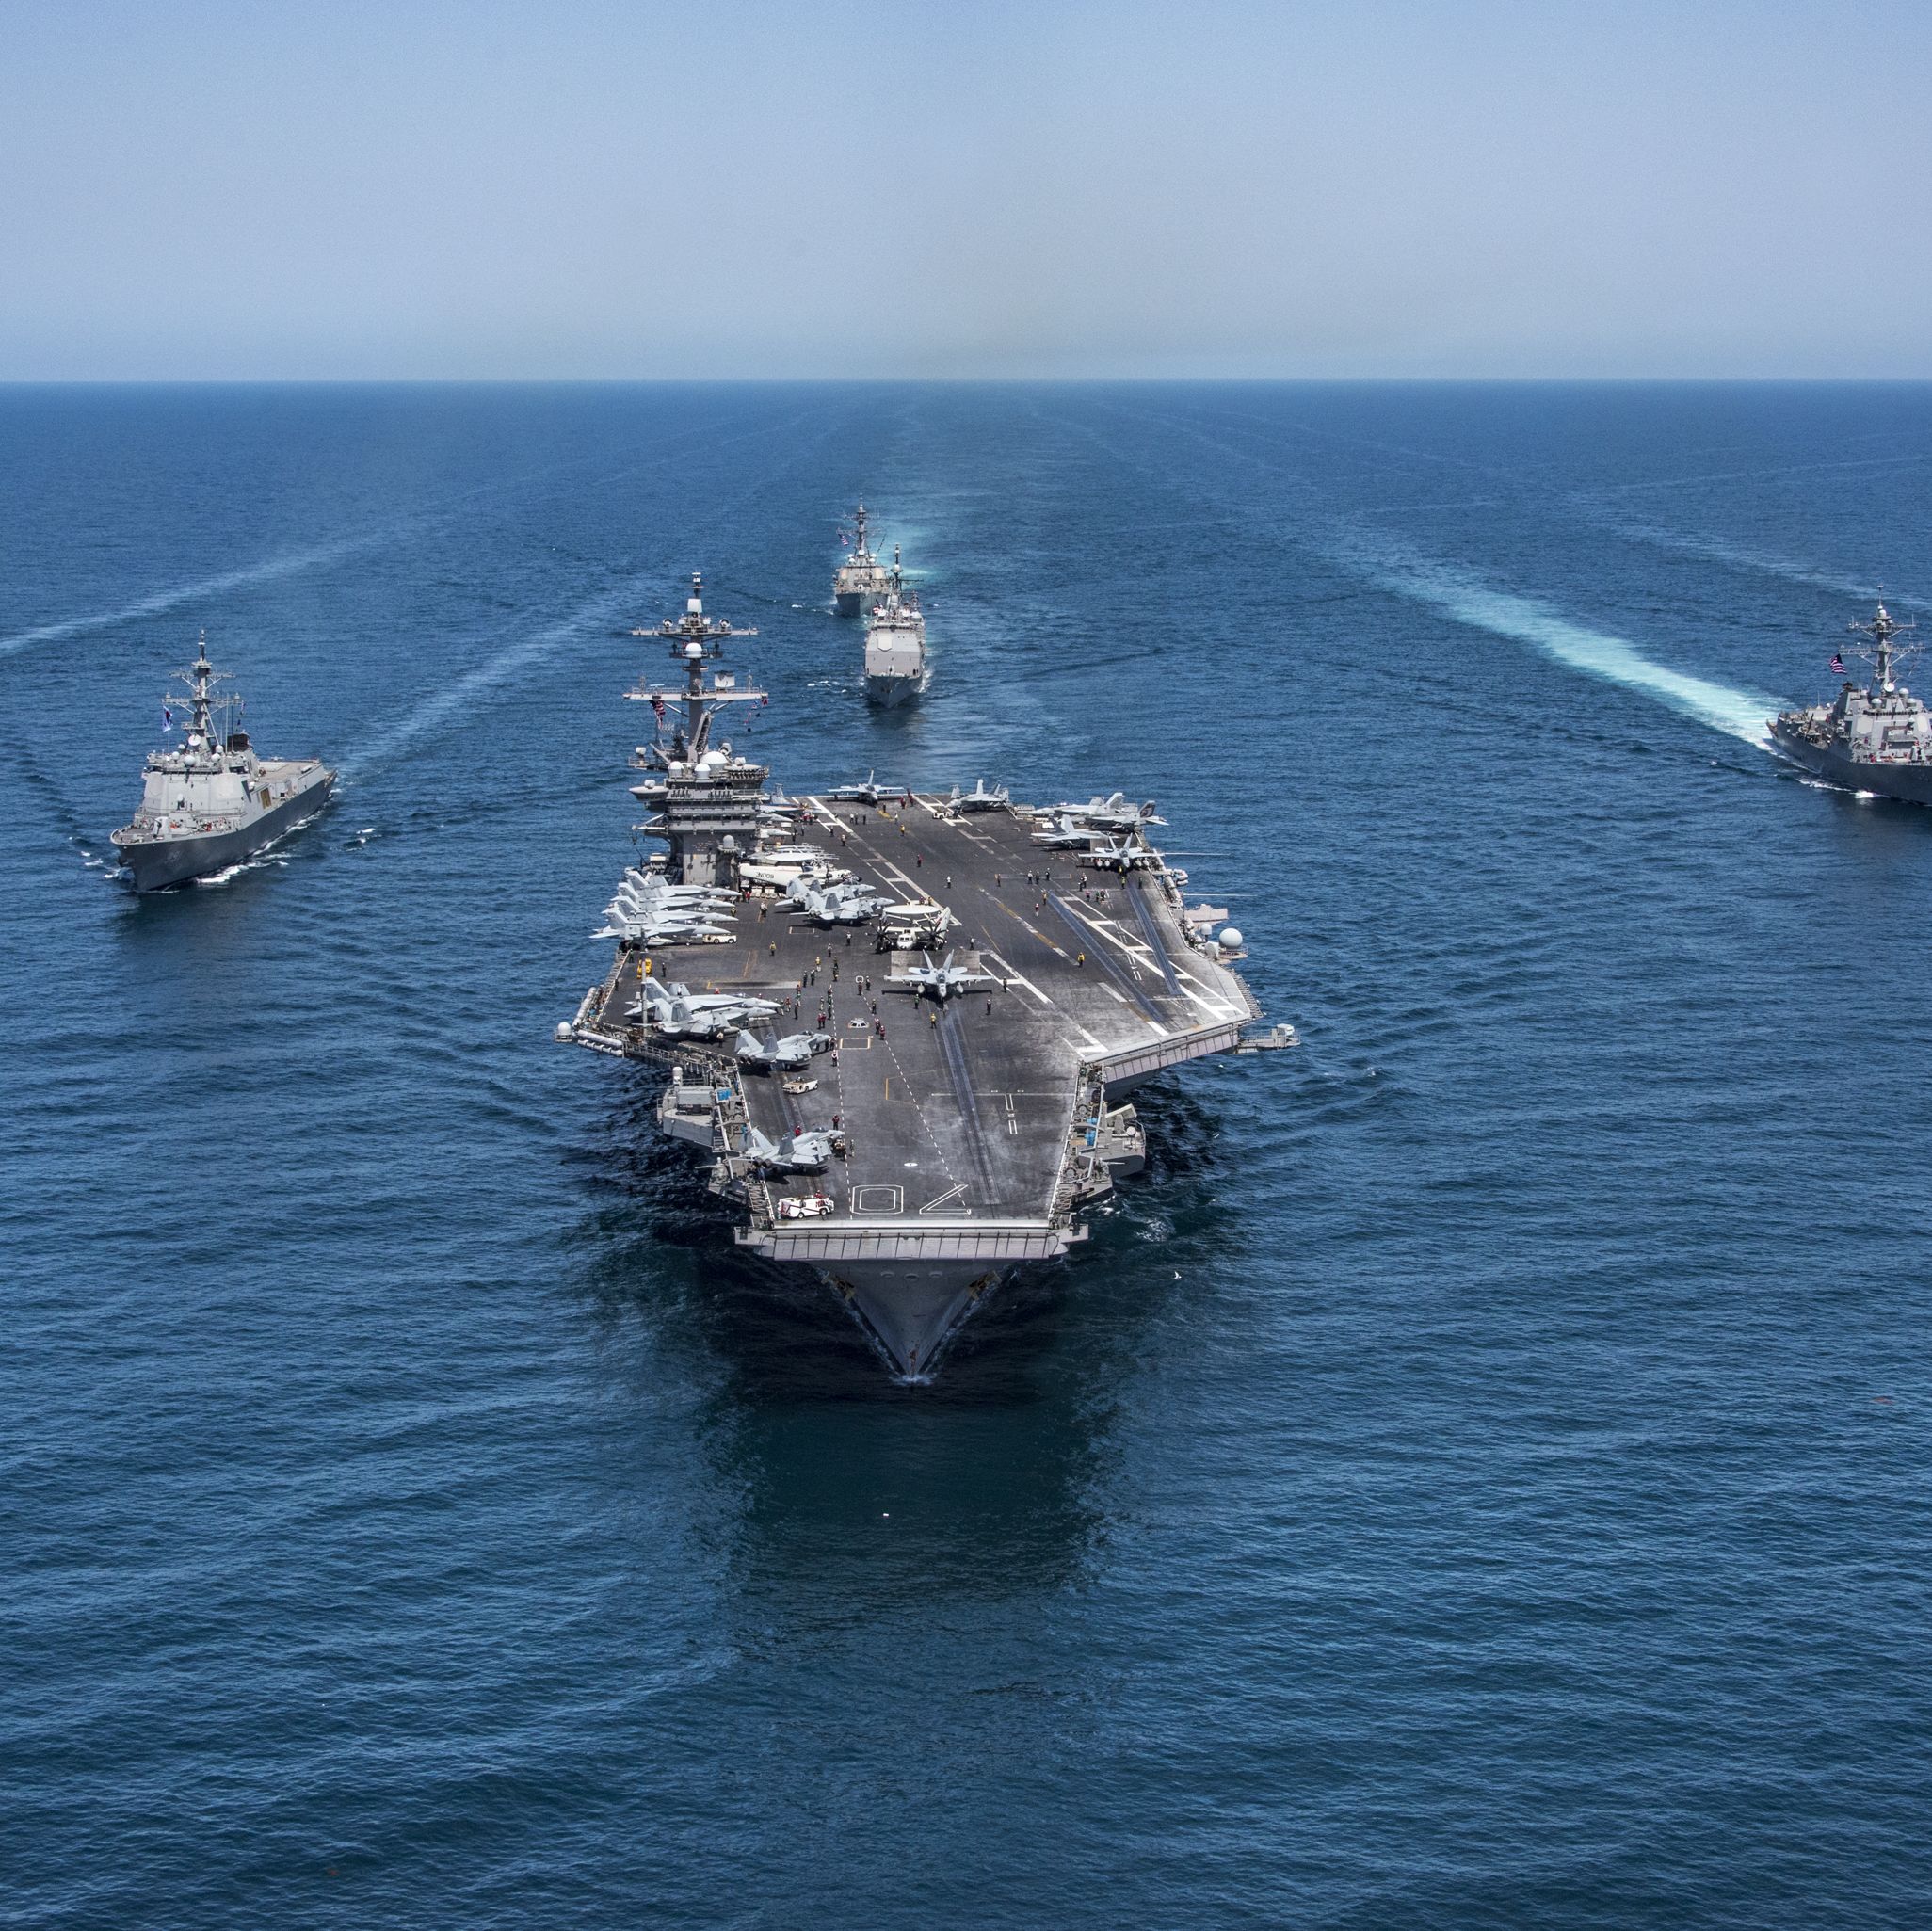 Do the U.S. Navy's Aircraft Carriers Still Rule the Seas After Nearly 100 Years?